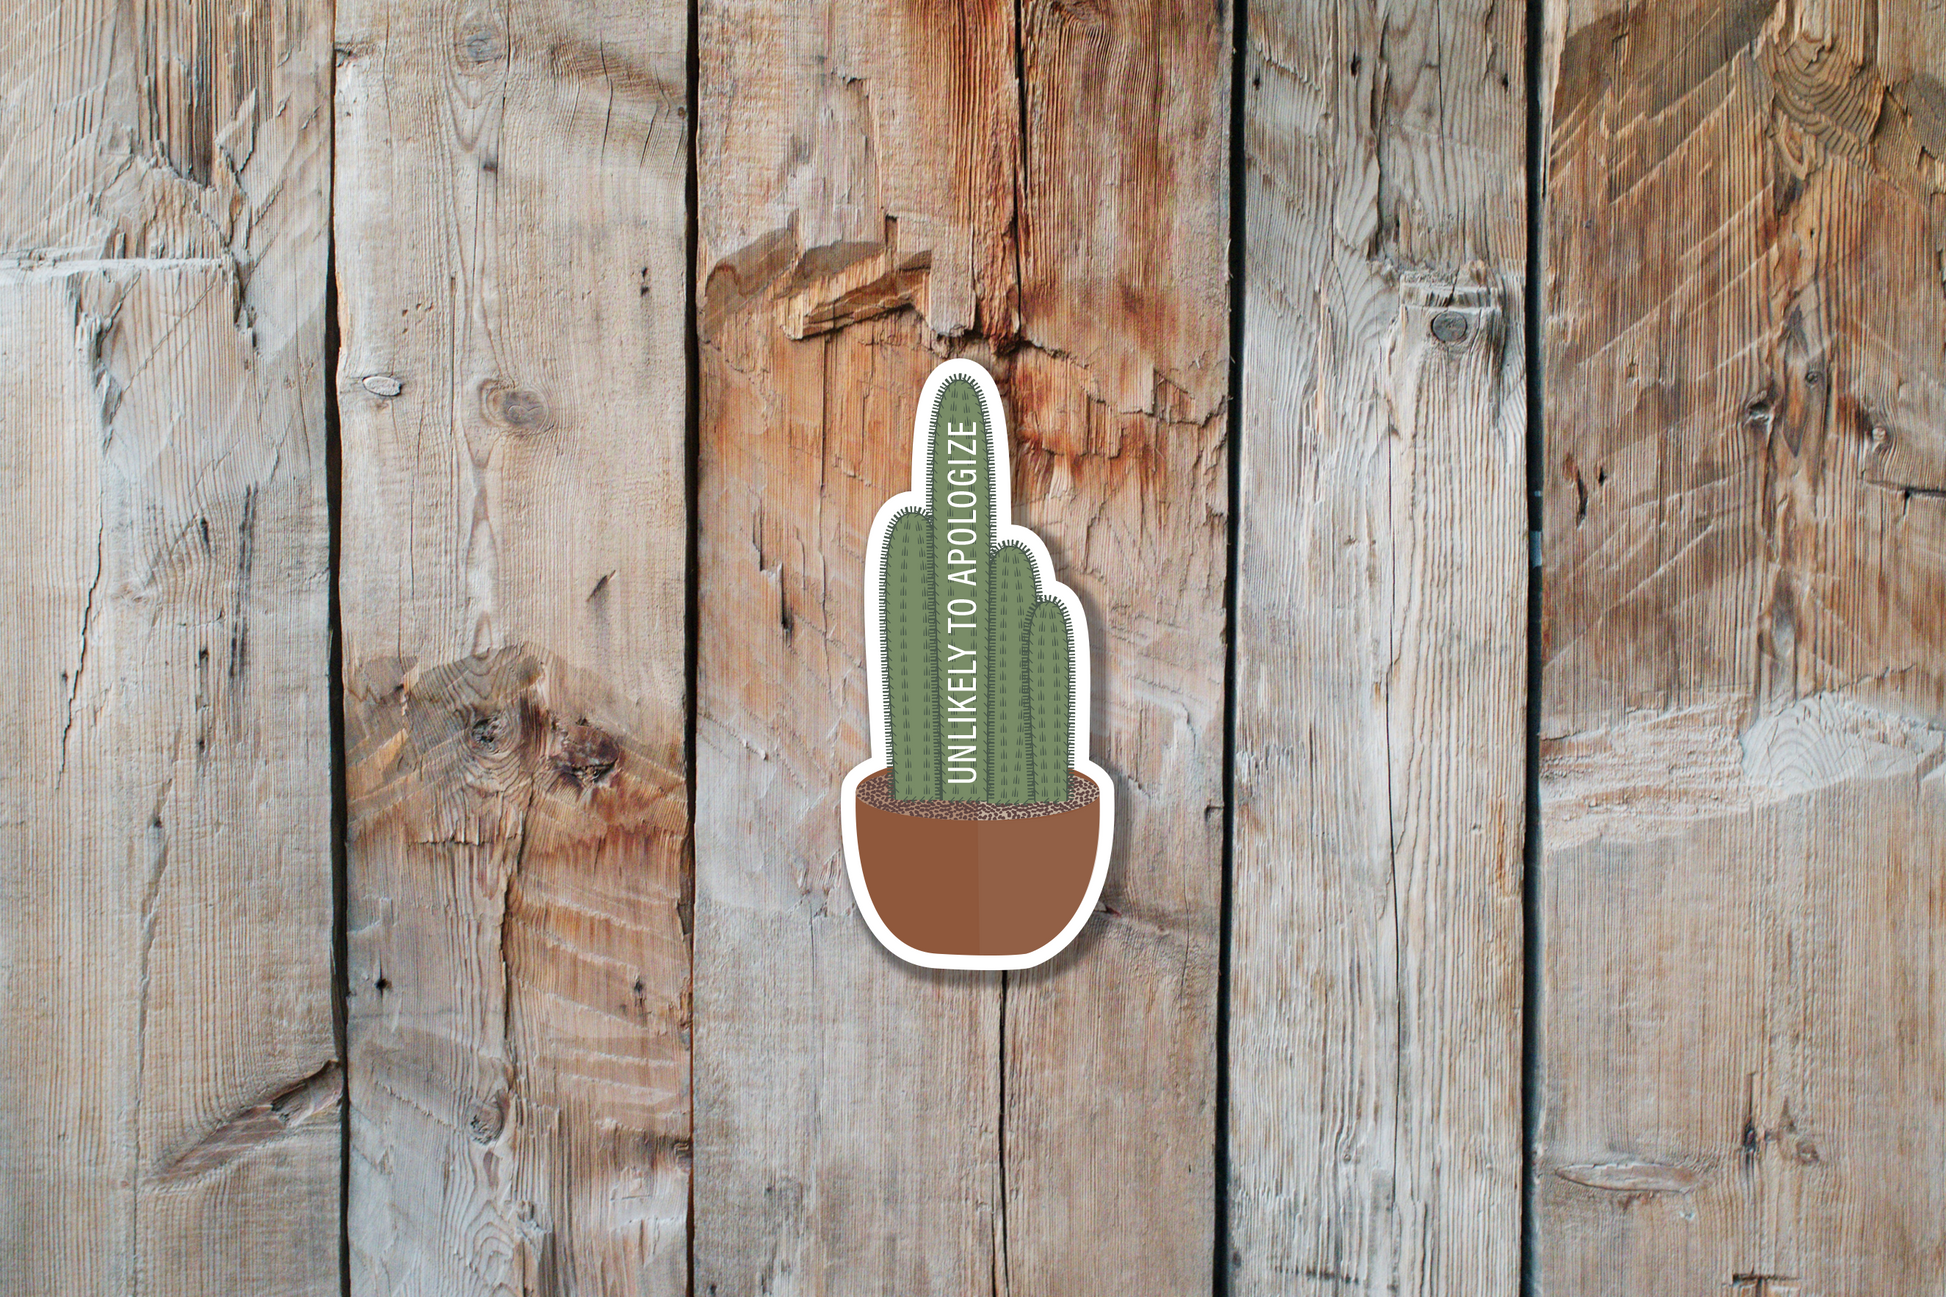 Unlikely to Apologize Cactus Sticker | Cactus Sticker | Succulent Sticker | House Plant Sticker 